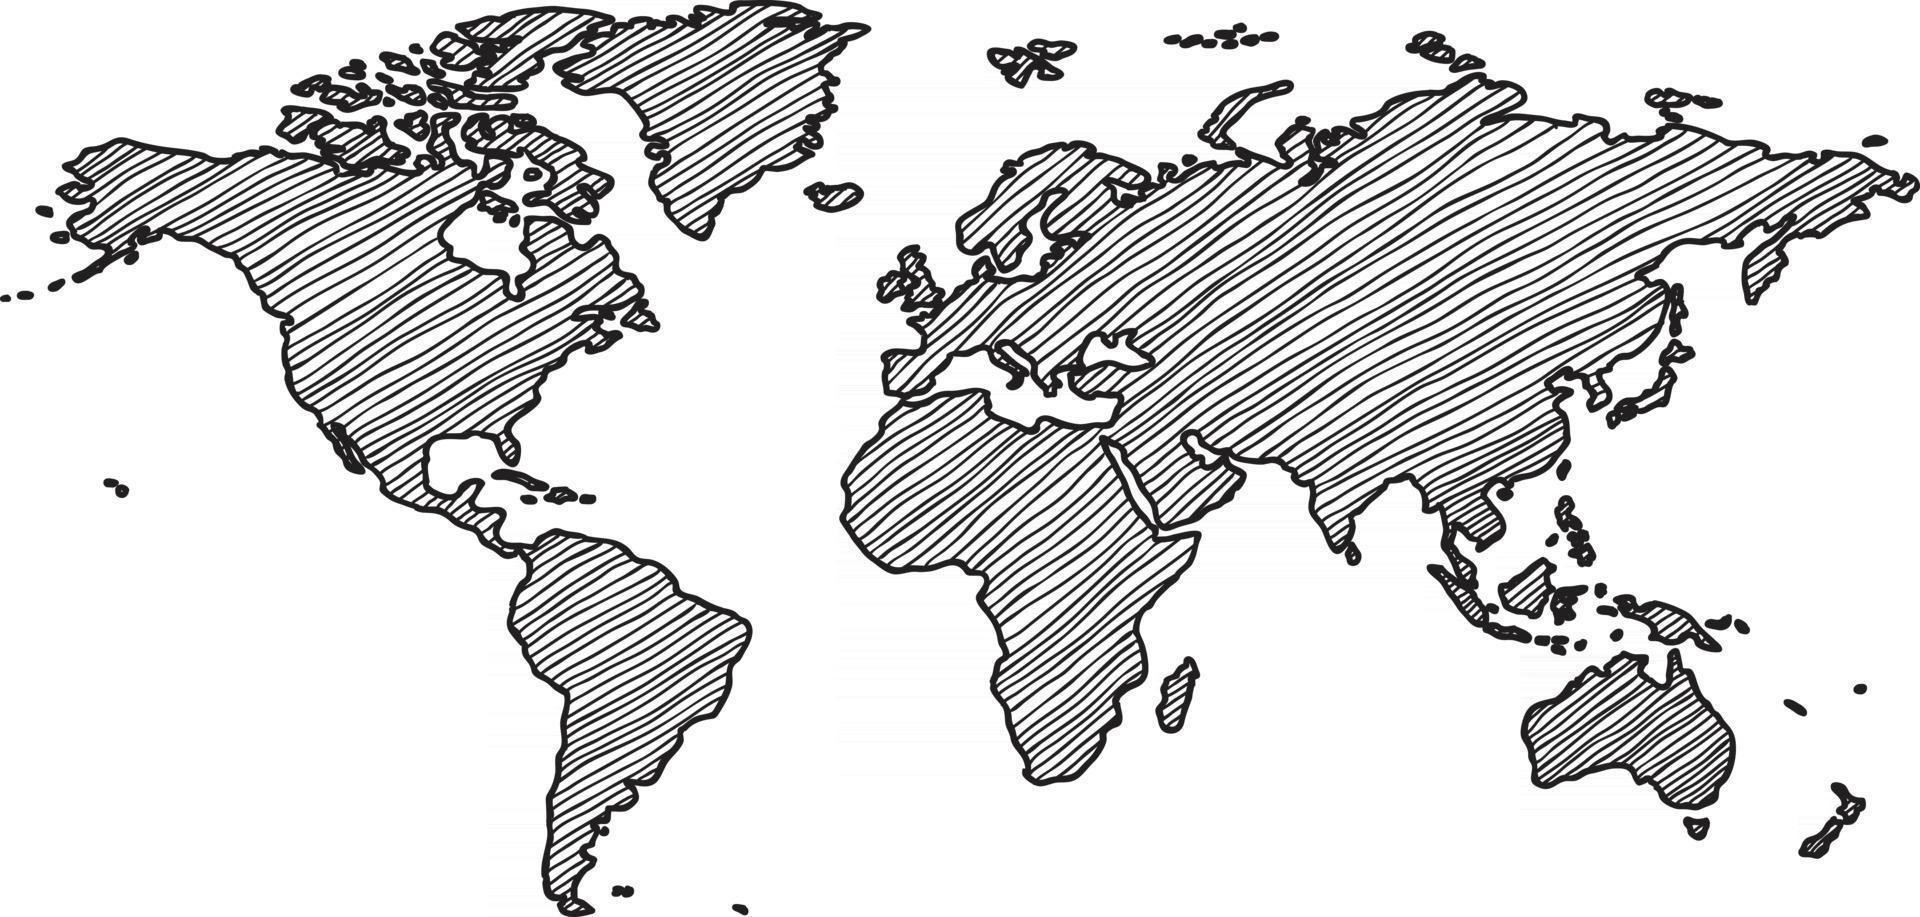 Freehand world map sketch on white background. vector